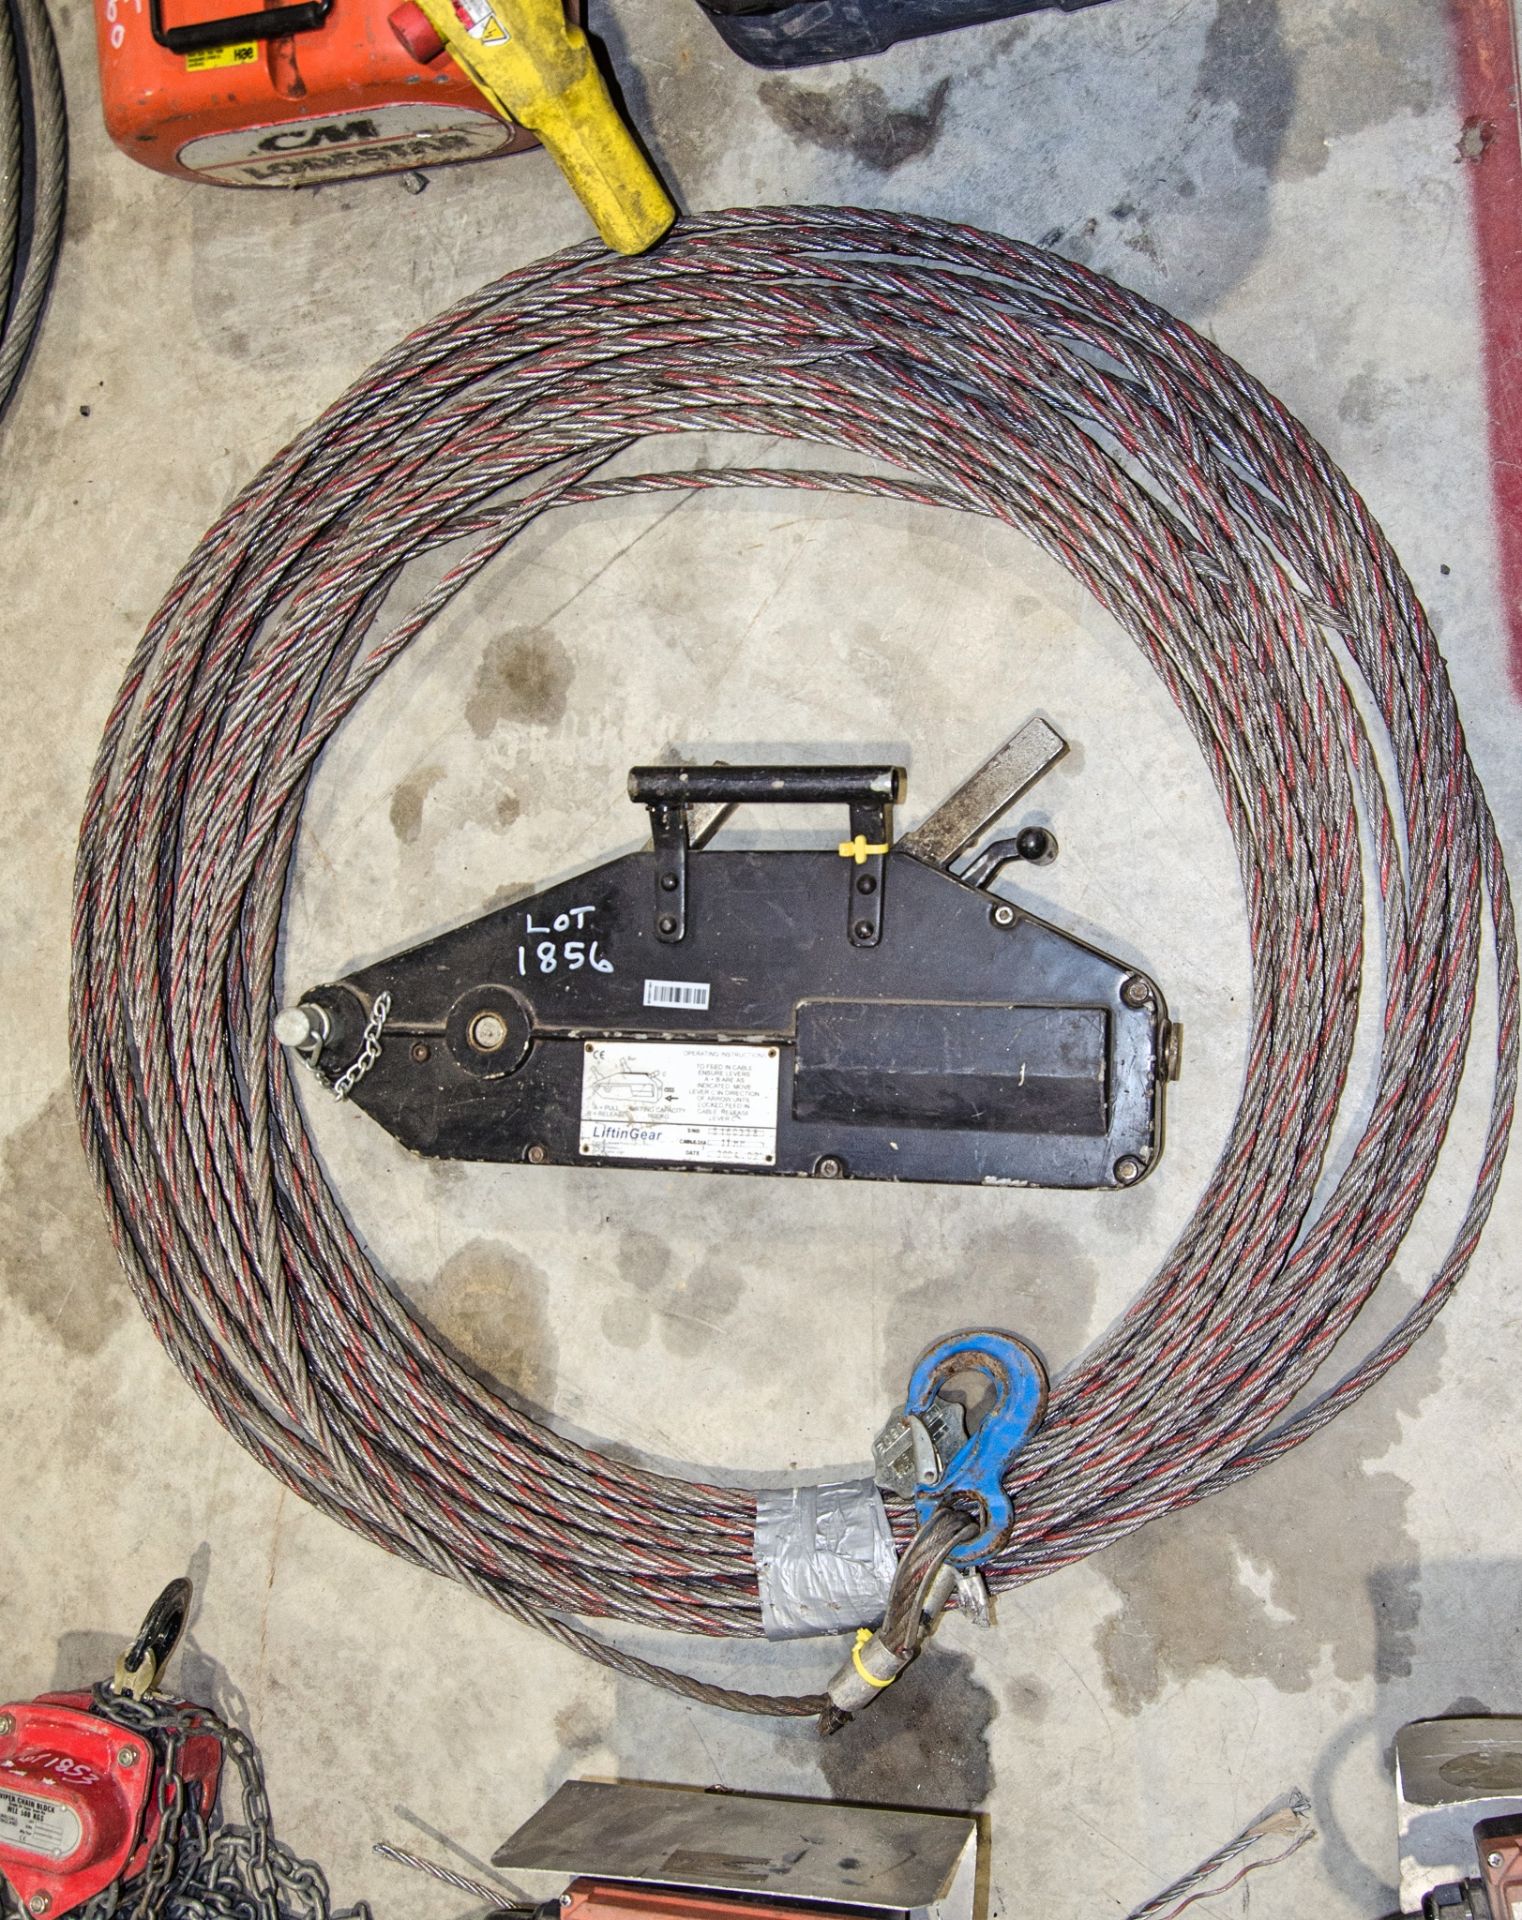 Liftin Gear wire rope winch c/w wire rope